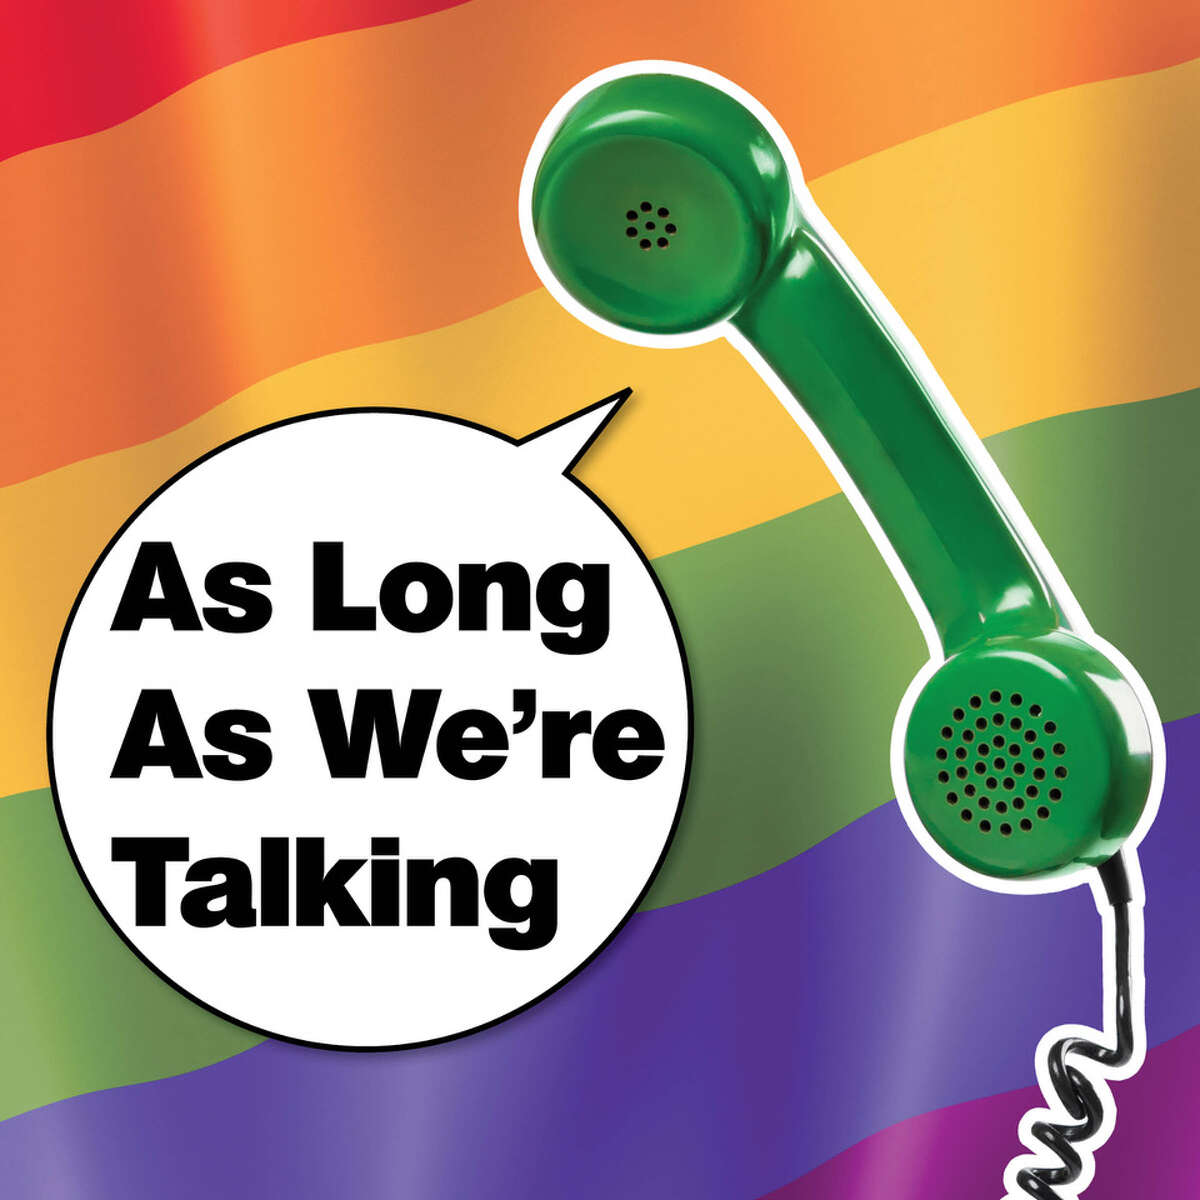 "As Long As We're Talking" will be staged by Pantochino Productions June 24-26 in Milford. 